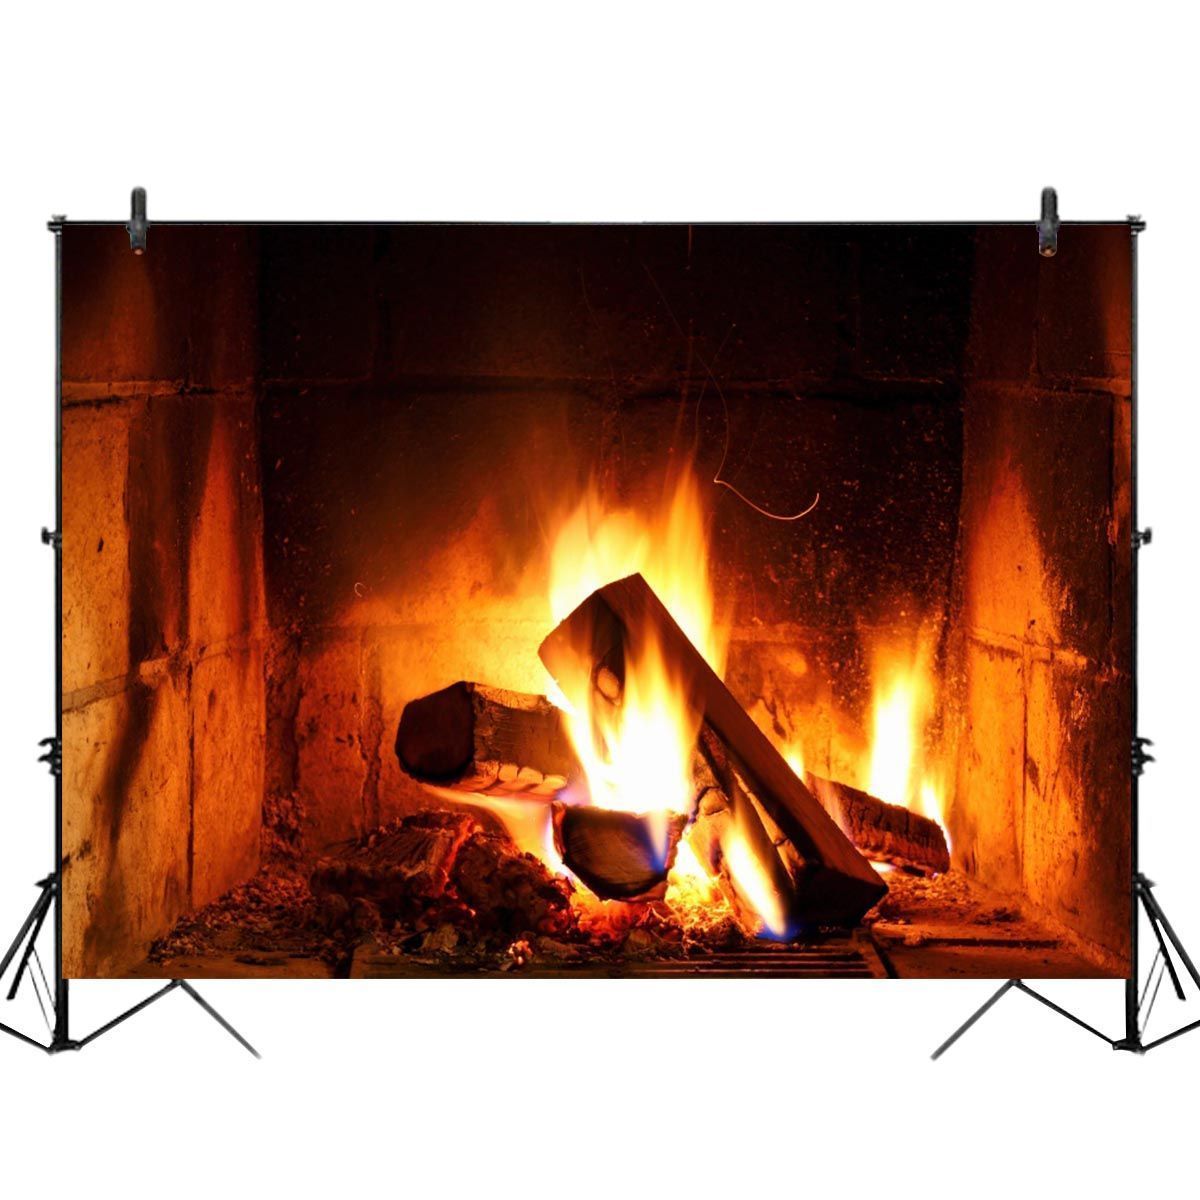 2x1FT-3x2FT-Fireplace-Fire-Wood-Photography-Backdrop-Background-Studio-Prop-1636953